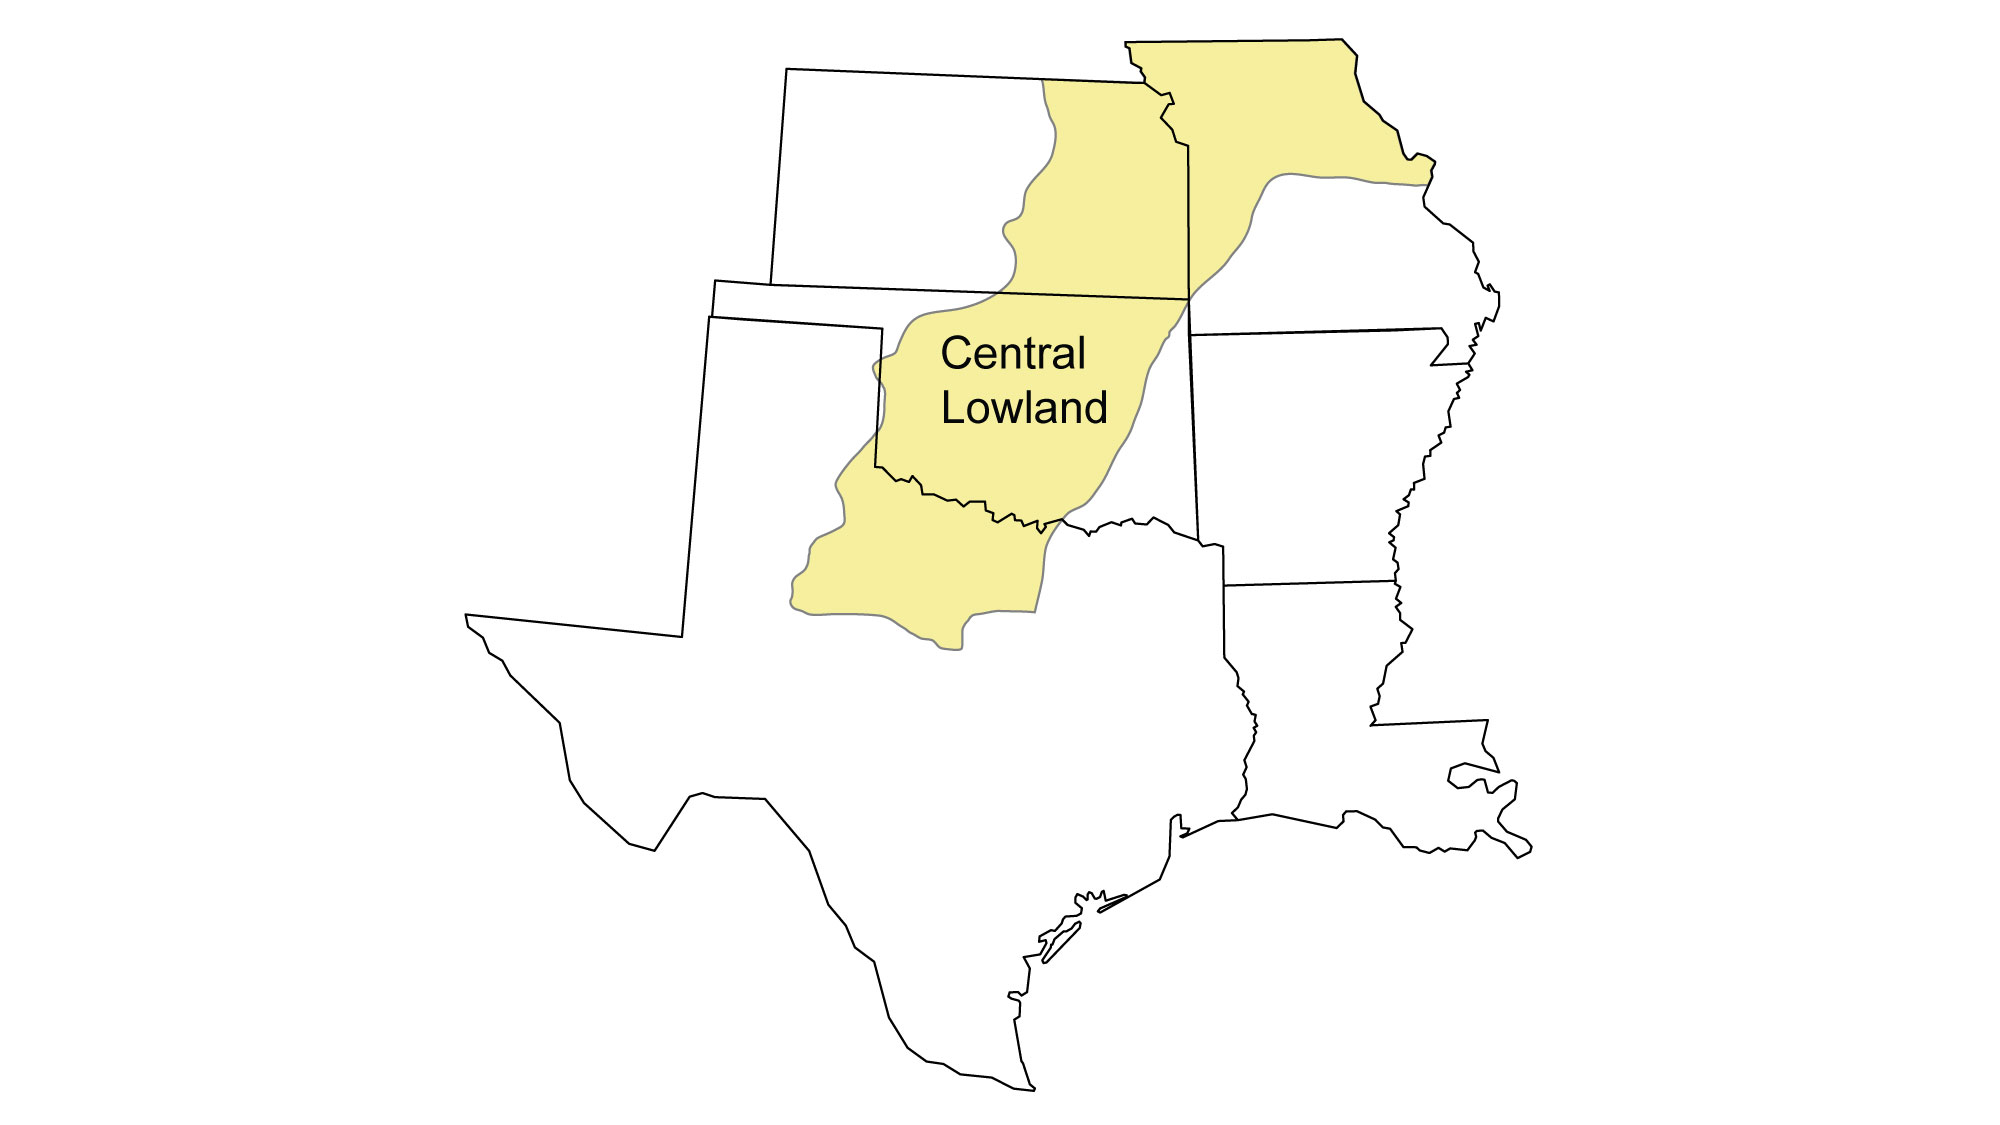 Simple map showing the Central Lowland region of the South Central United States, including all of Louisiana, and portions of Texas, Oklahoma, Kansas, and Missouri.